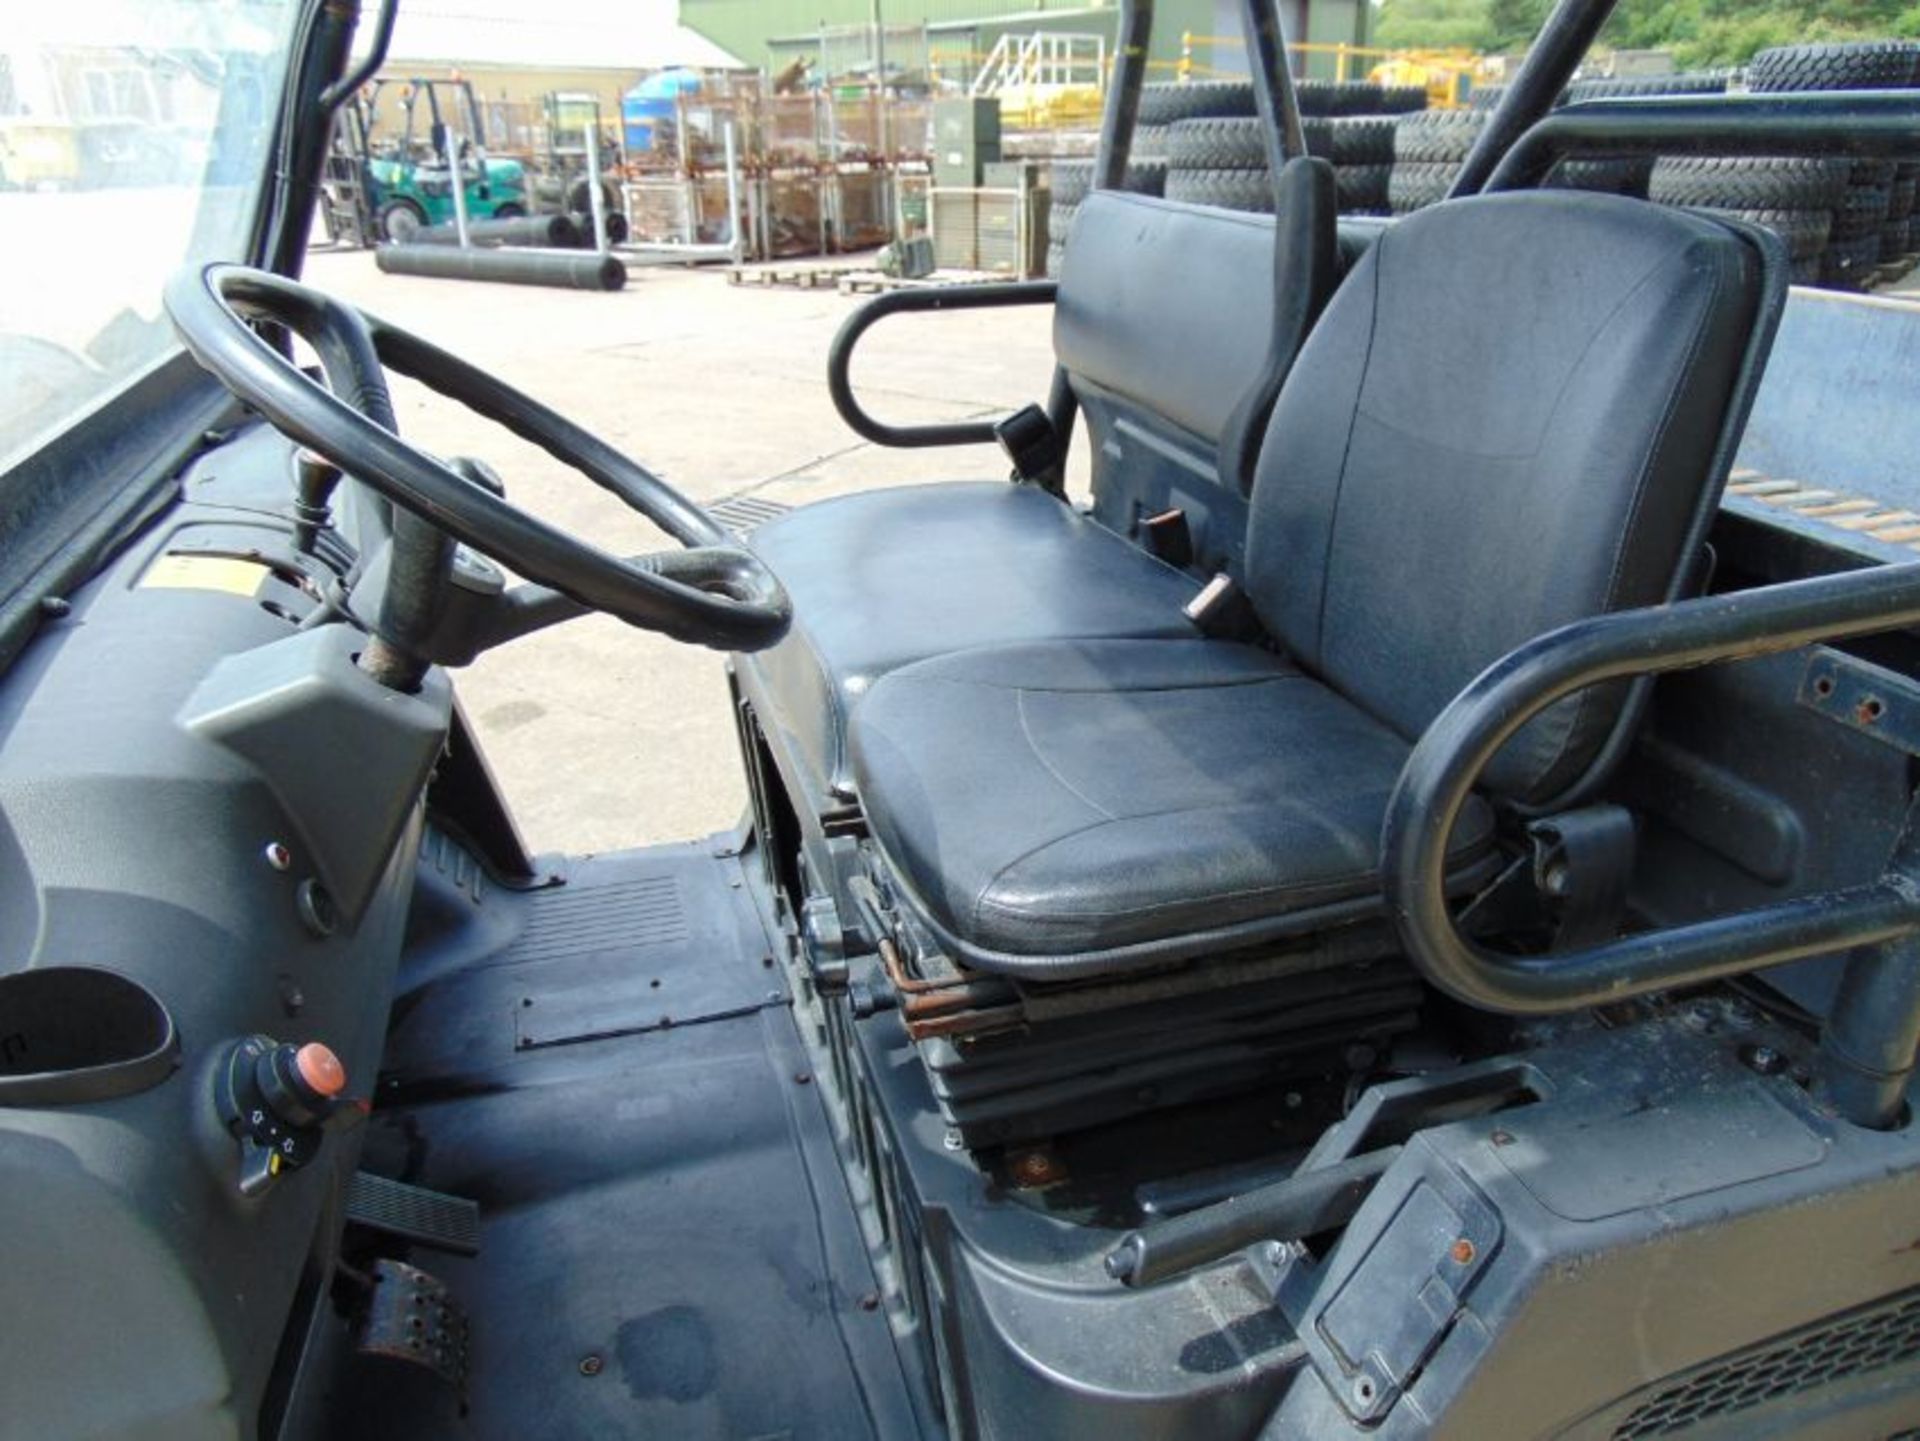 2014 Cushman XD1600 4x4 Diesel Utility Vehicle Showing 1333 hrs - Image 16 of 19